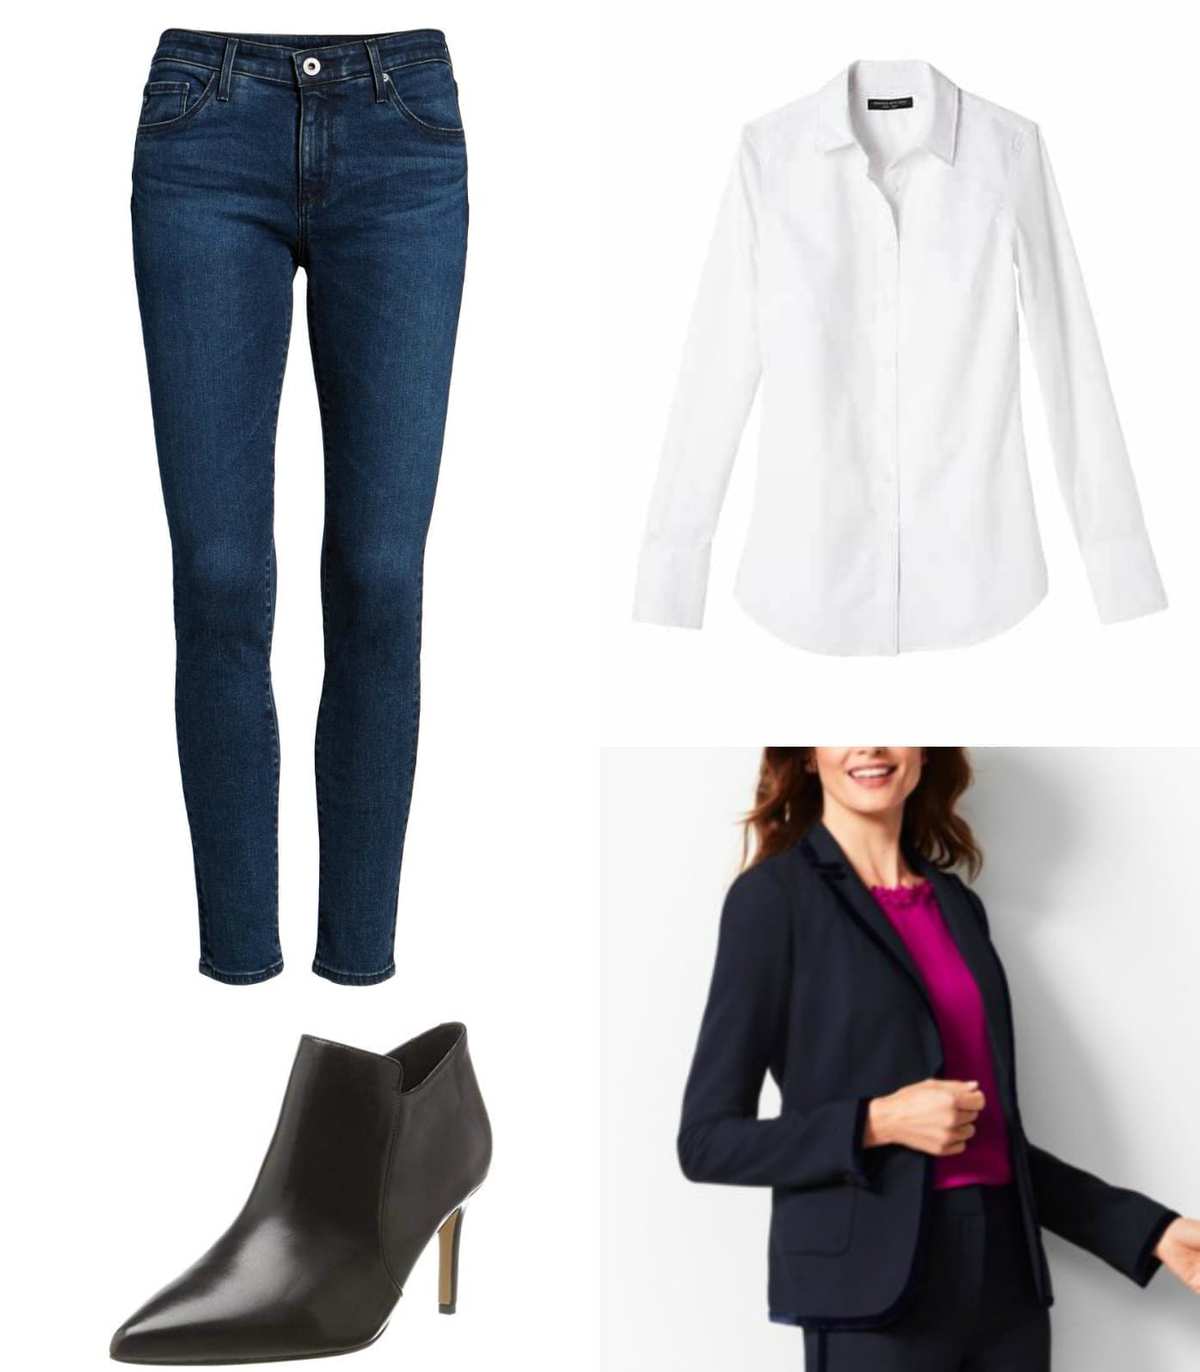 Navy blazer, ankle jeans, and a white shirt